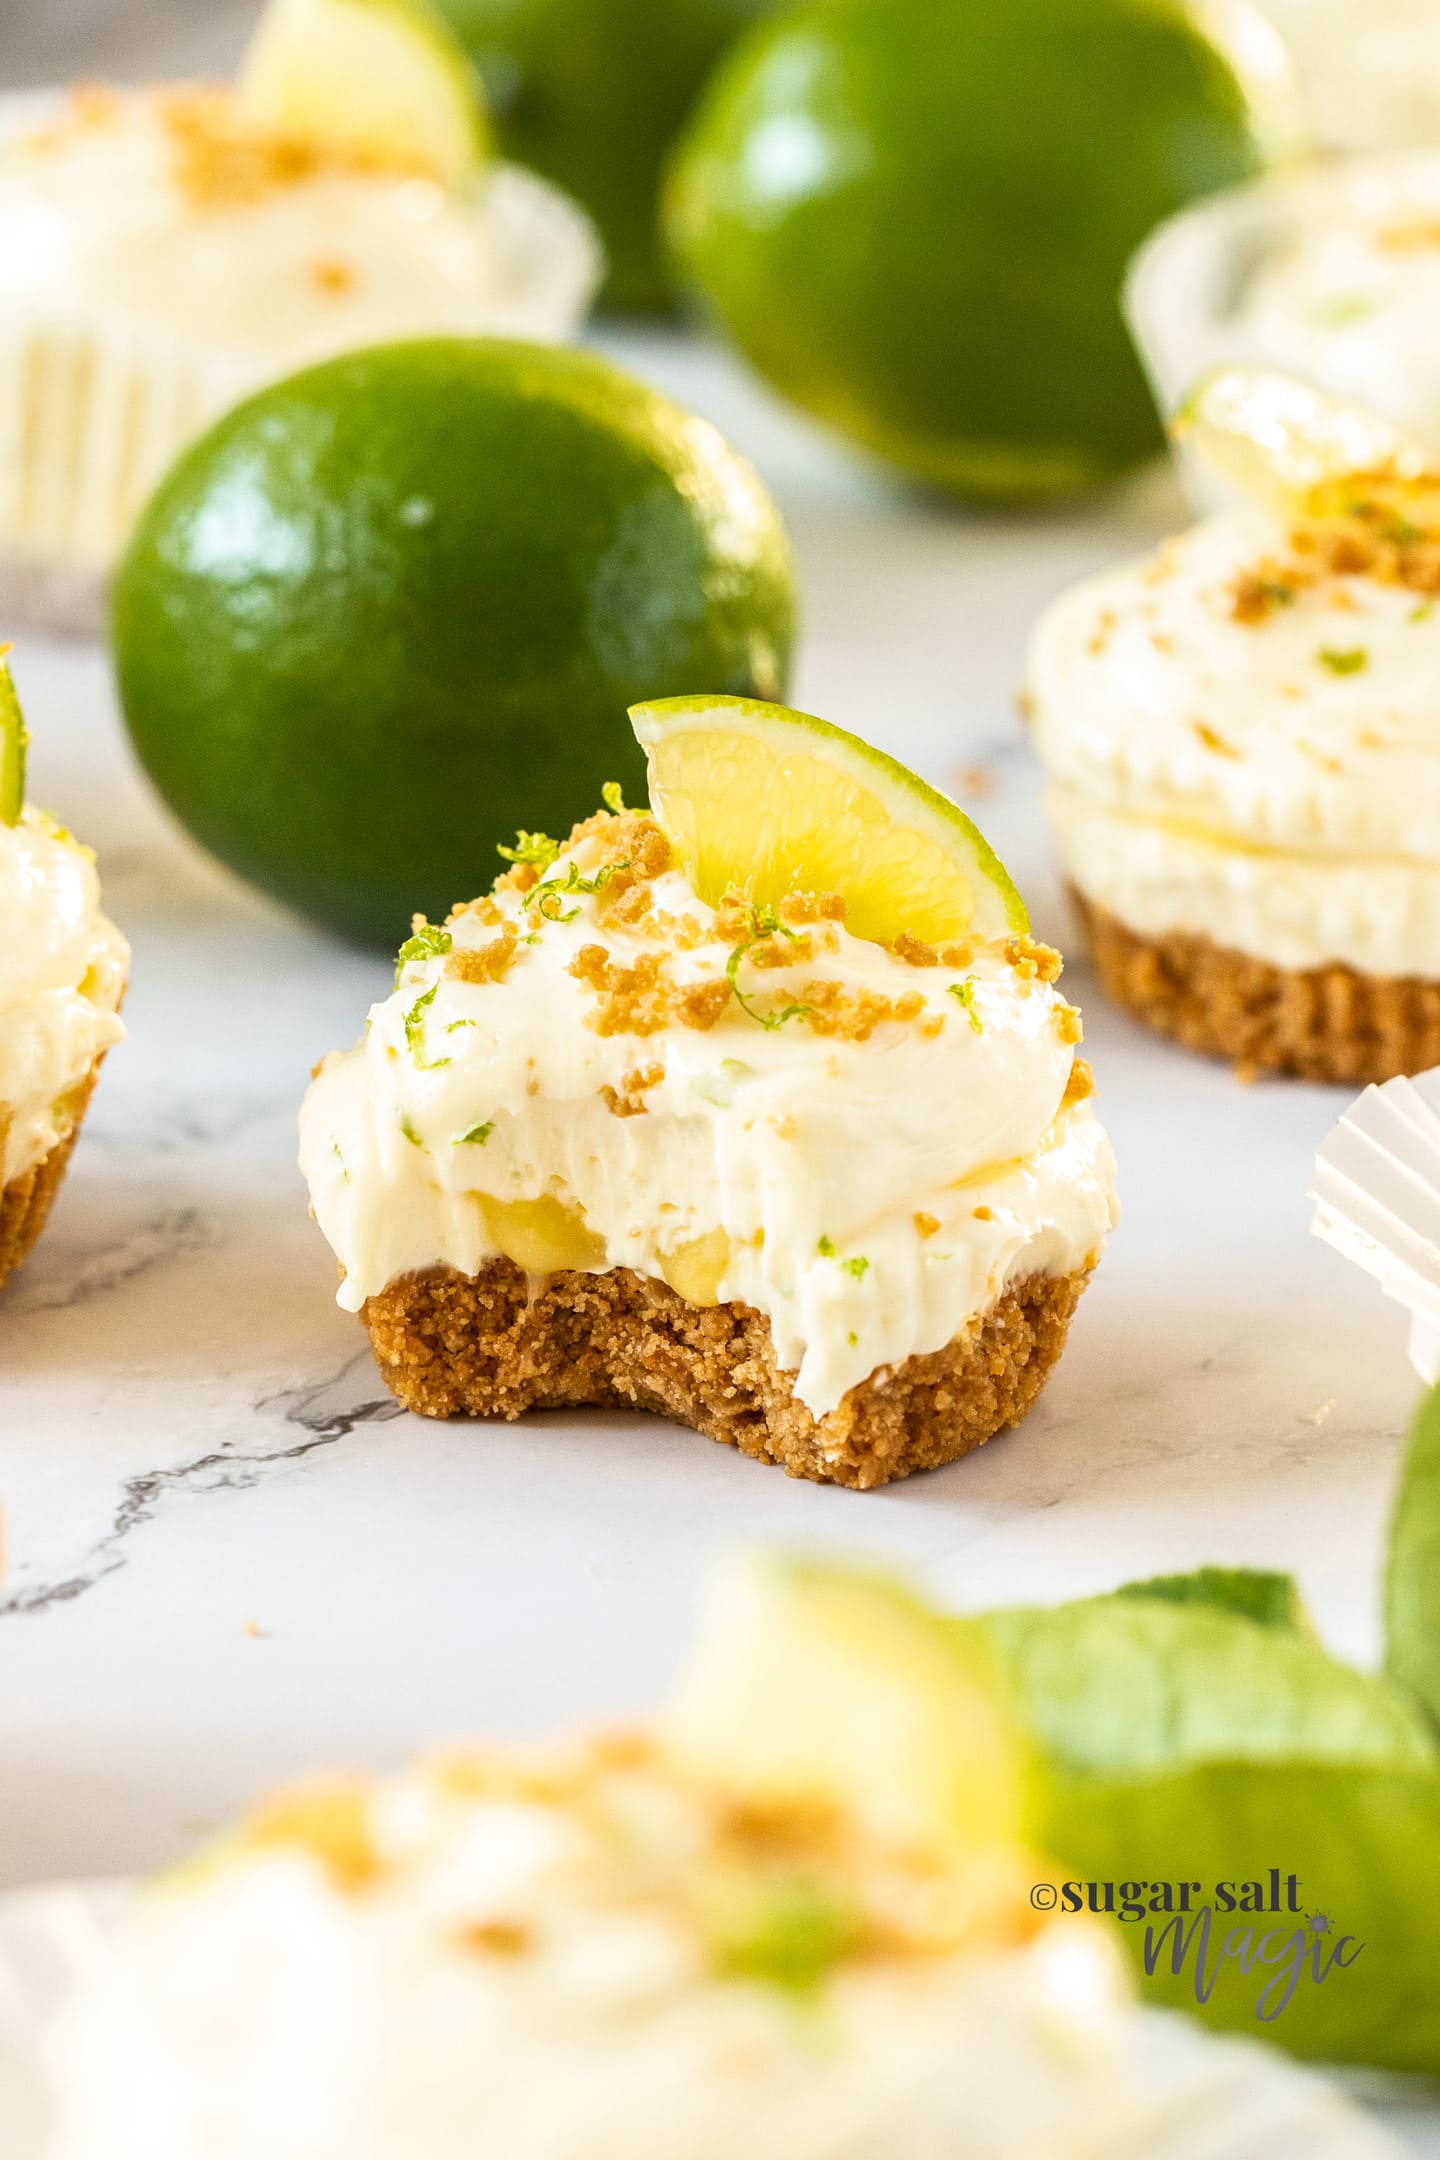 A mini lime cheesecake with a bite taken out and limes in the background